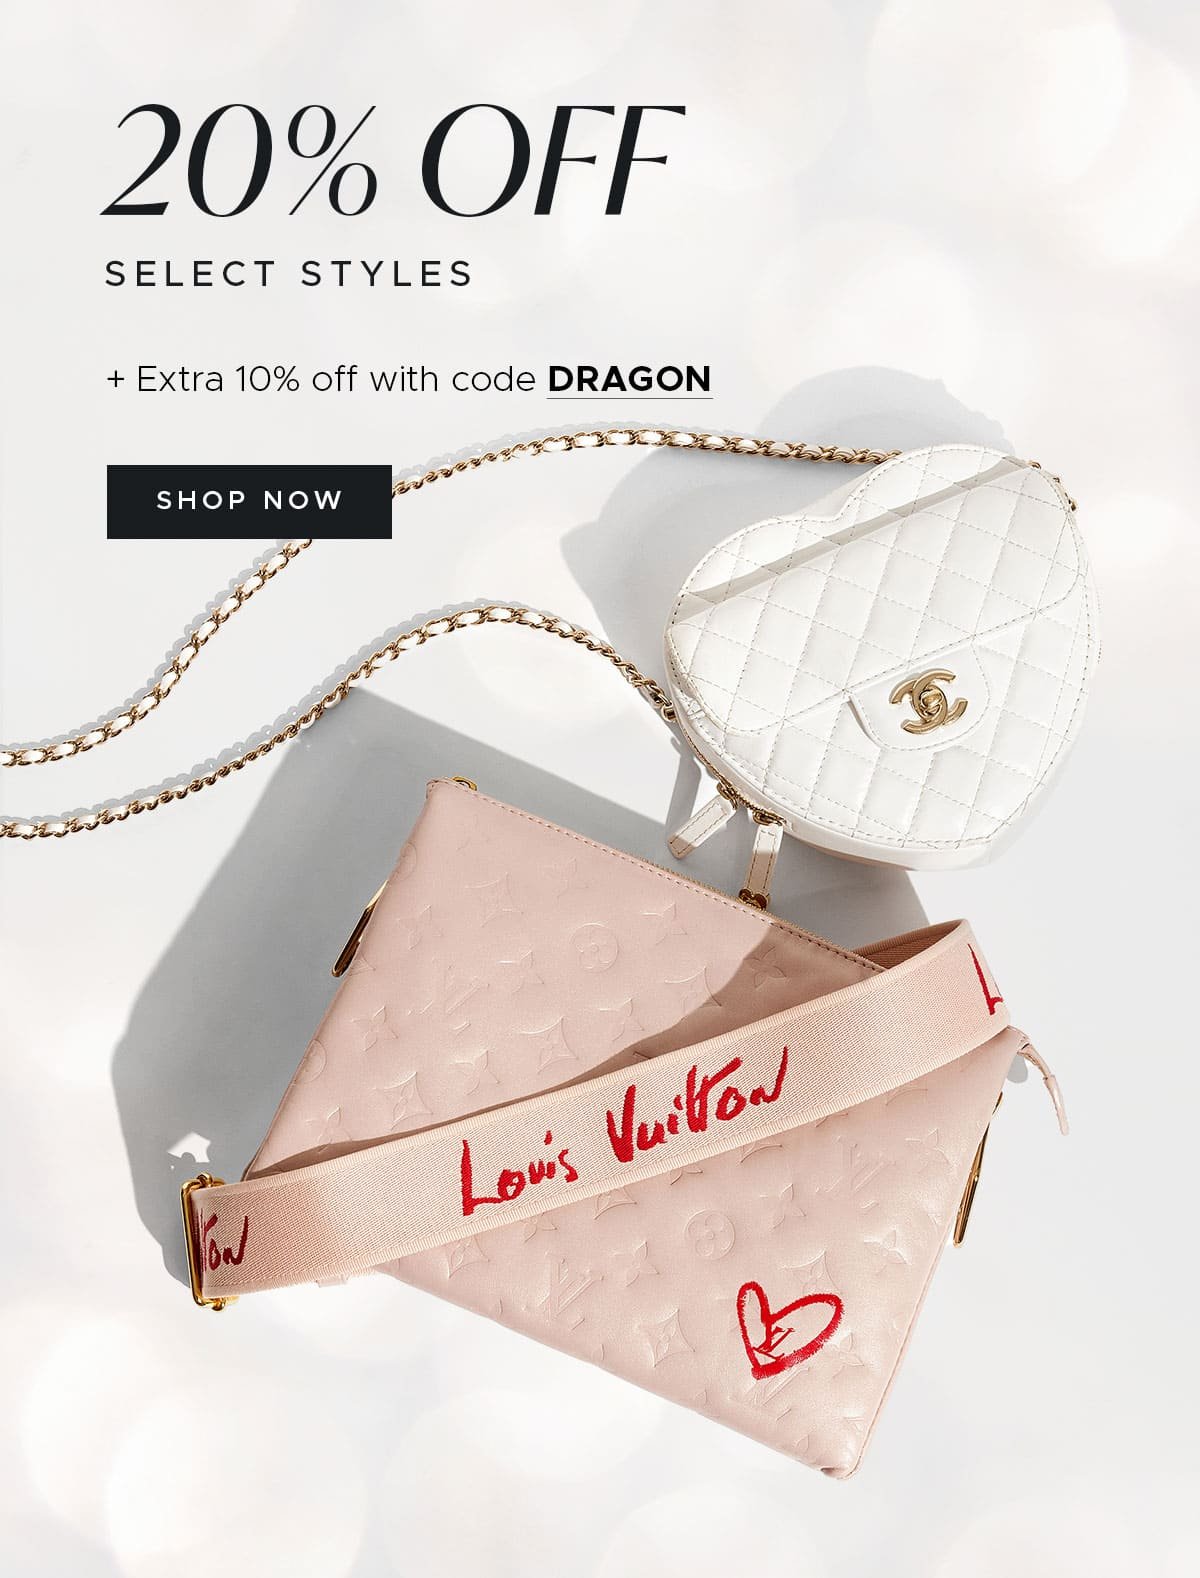 20% Off Select Styles - Code DRAGON